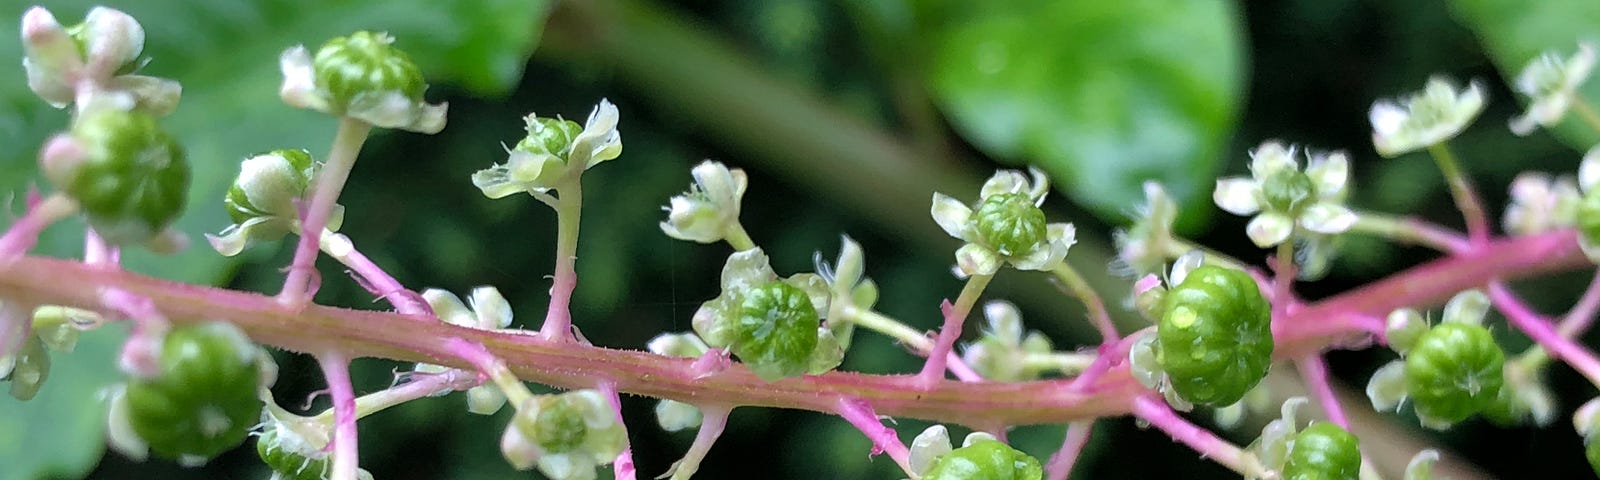 Pokeweed flower about to fruit.